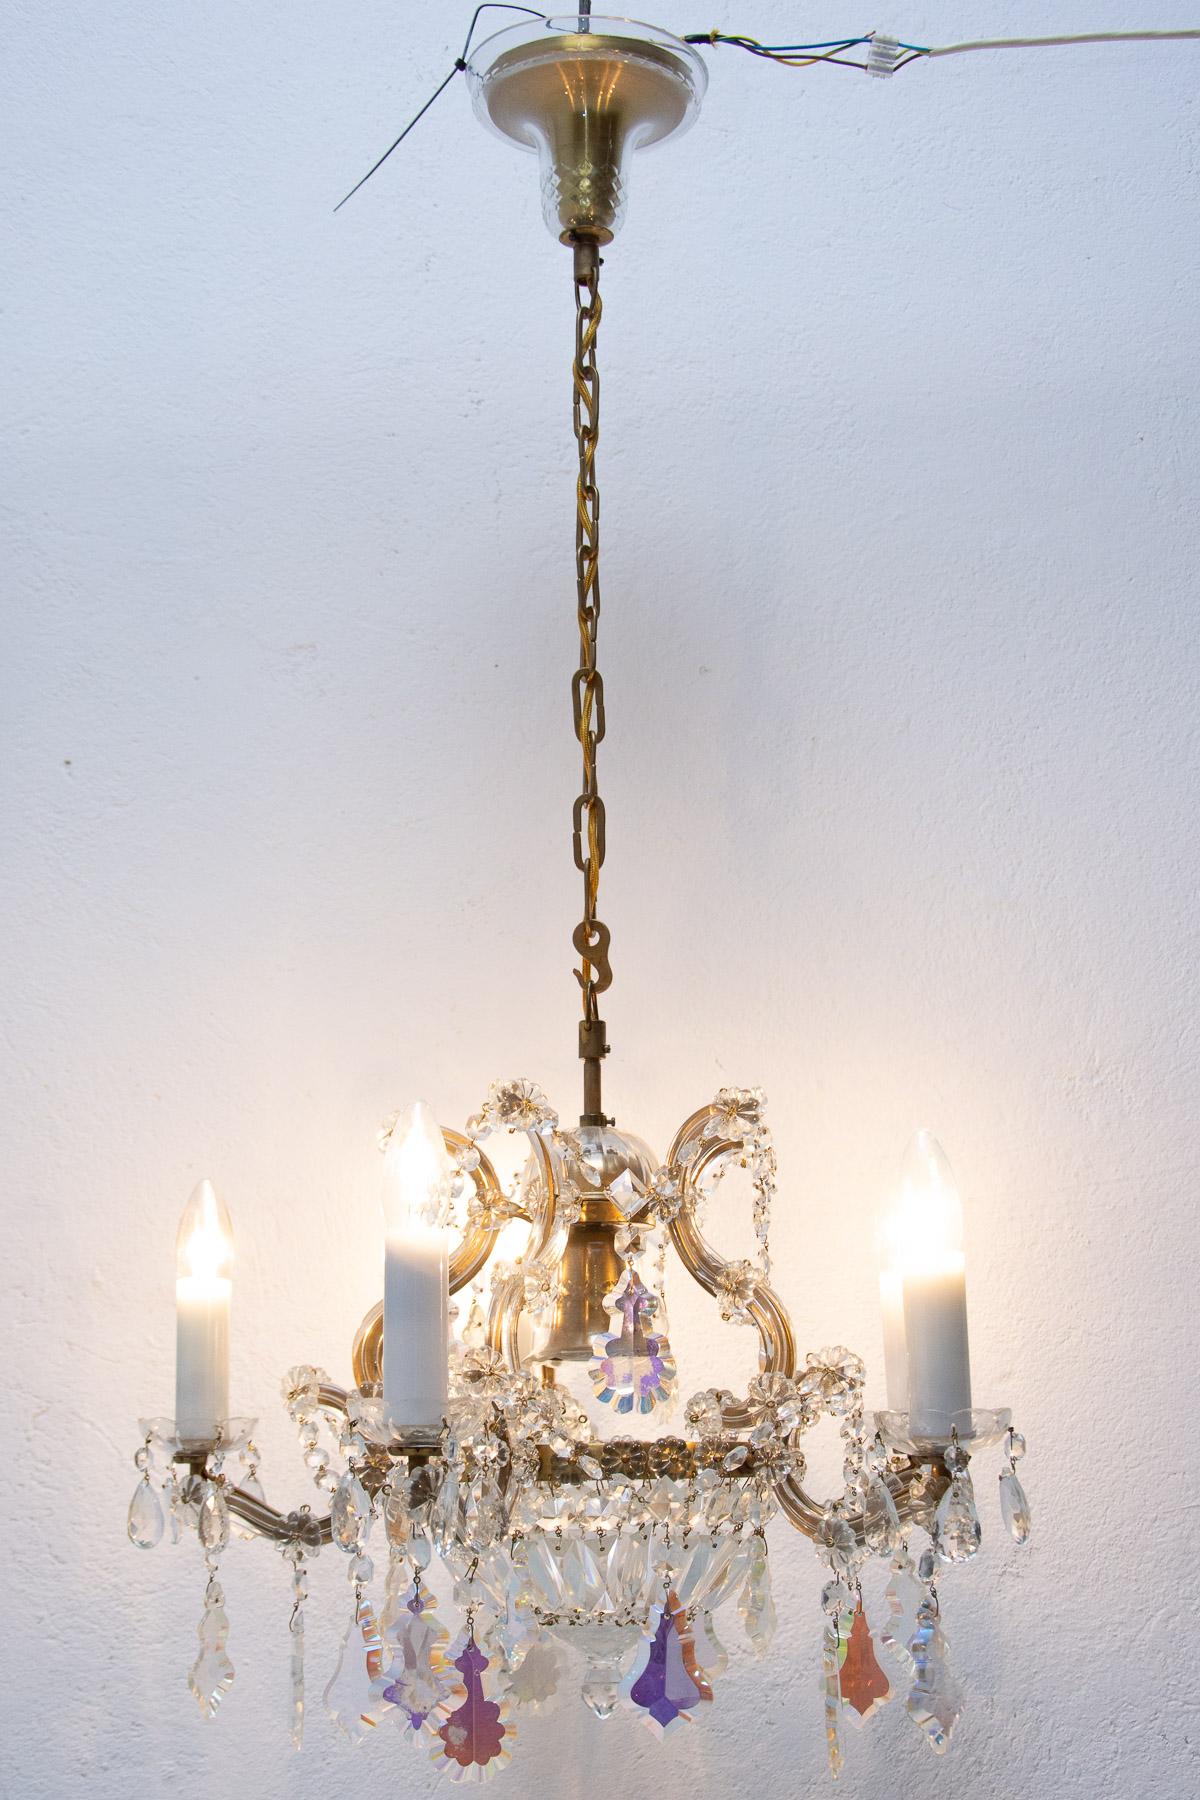 This beautiful crystal glass chandelier was made in the 1930s in the former Czechoslovakia. It has a new wiring. An excellent quality piece, it has a cut glass beads and pendants hanging from the brass centre. In very good Vintage